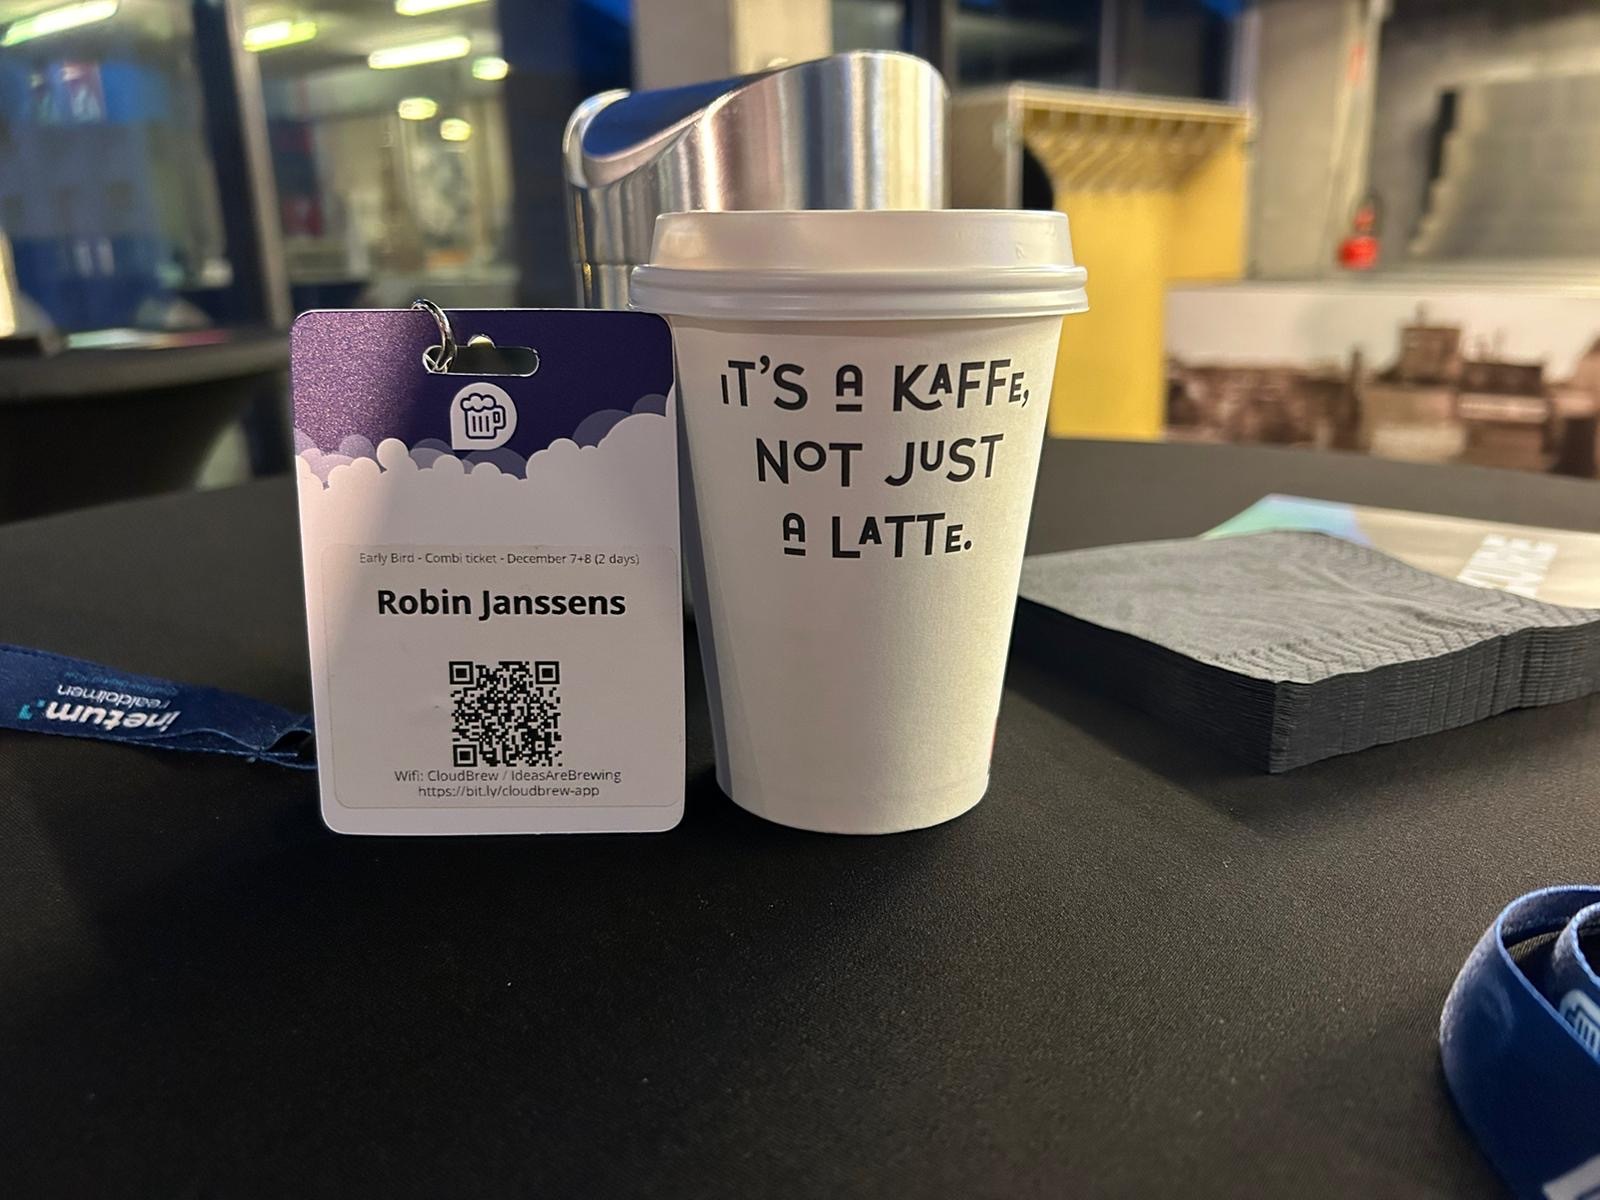 Team member Robin Janssens his cloudbrew badge and coffee